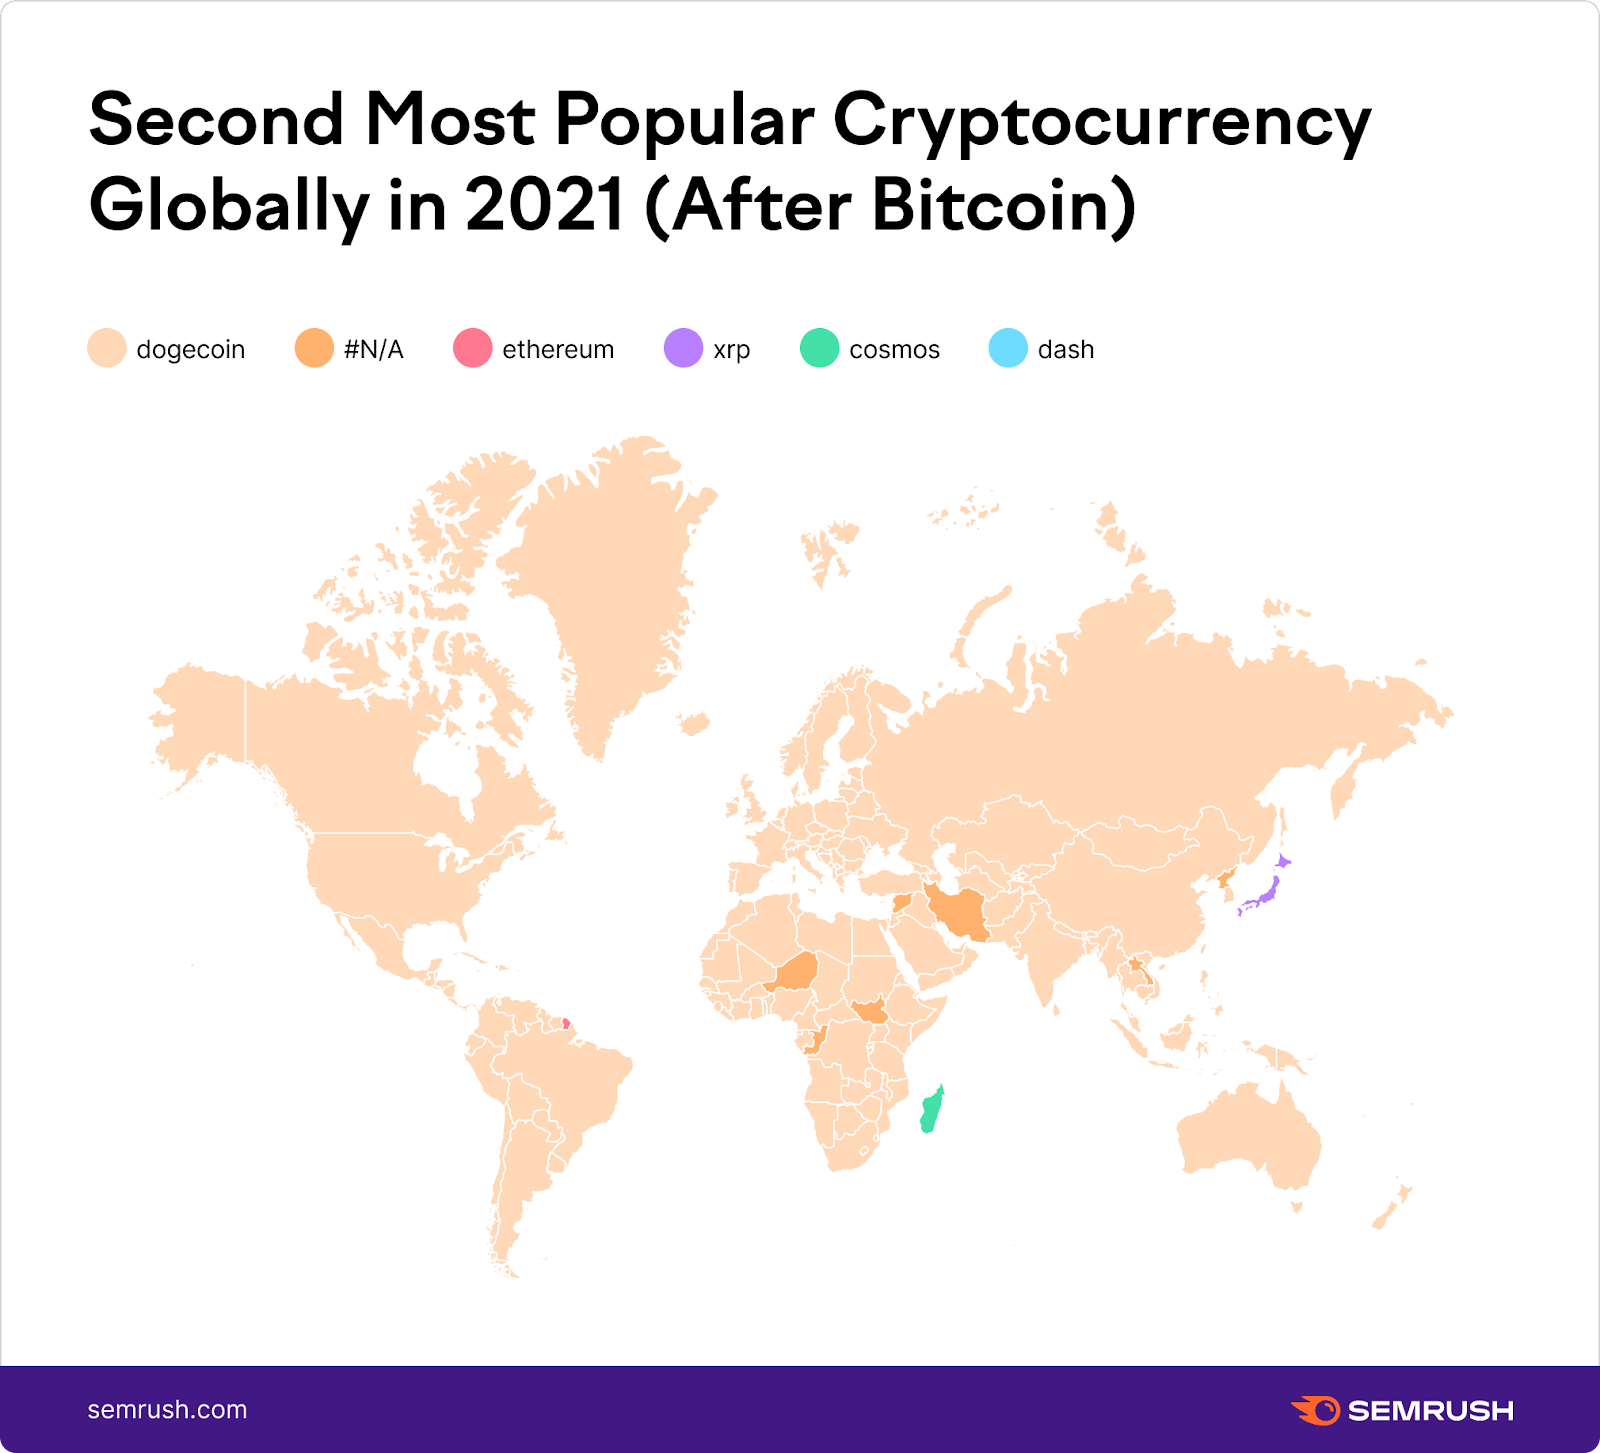 Semrush's "Second most popular cryptocurrency globally in 2021 (after bitcoin)" geographic infographic